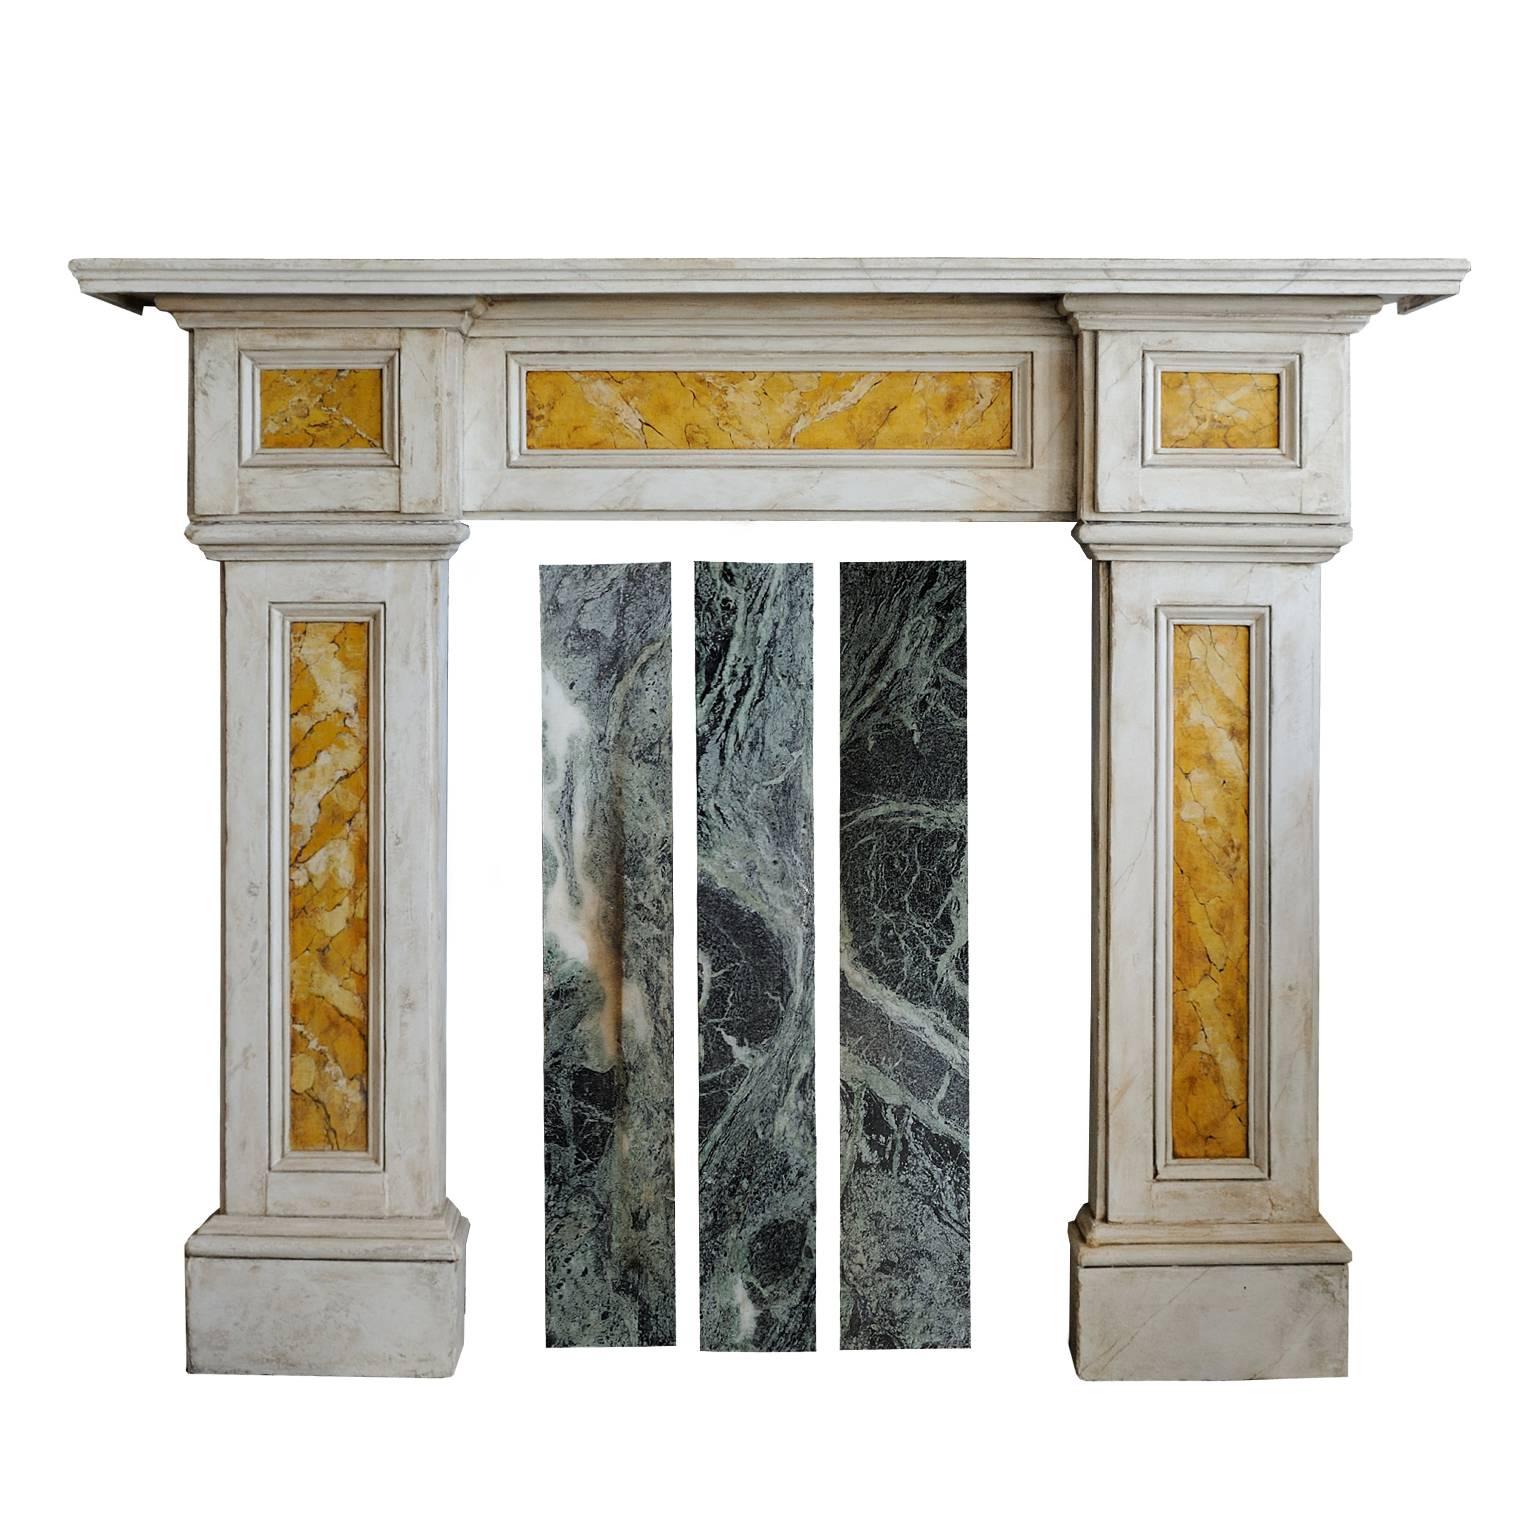 This is a really rather beautiful and elegant English late Georgian wooden fireplace, faux painted to resemble white marble and sienna marble with real green marble slips, a really striking addition to your room, circa 1830.